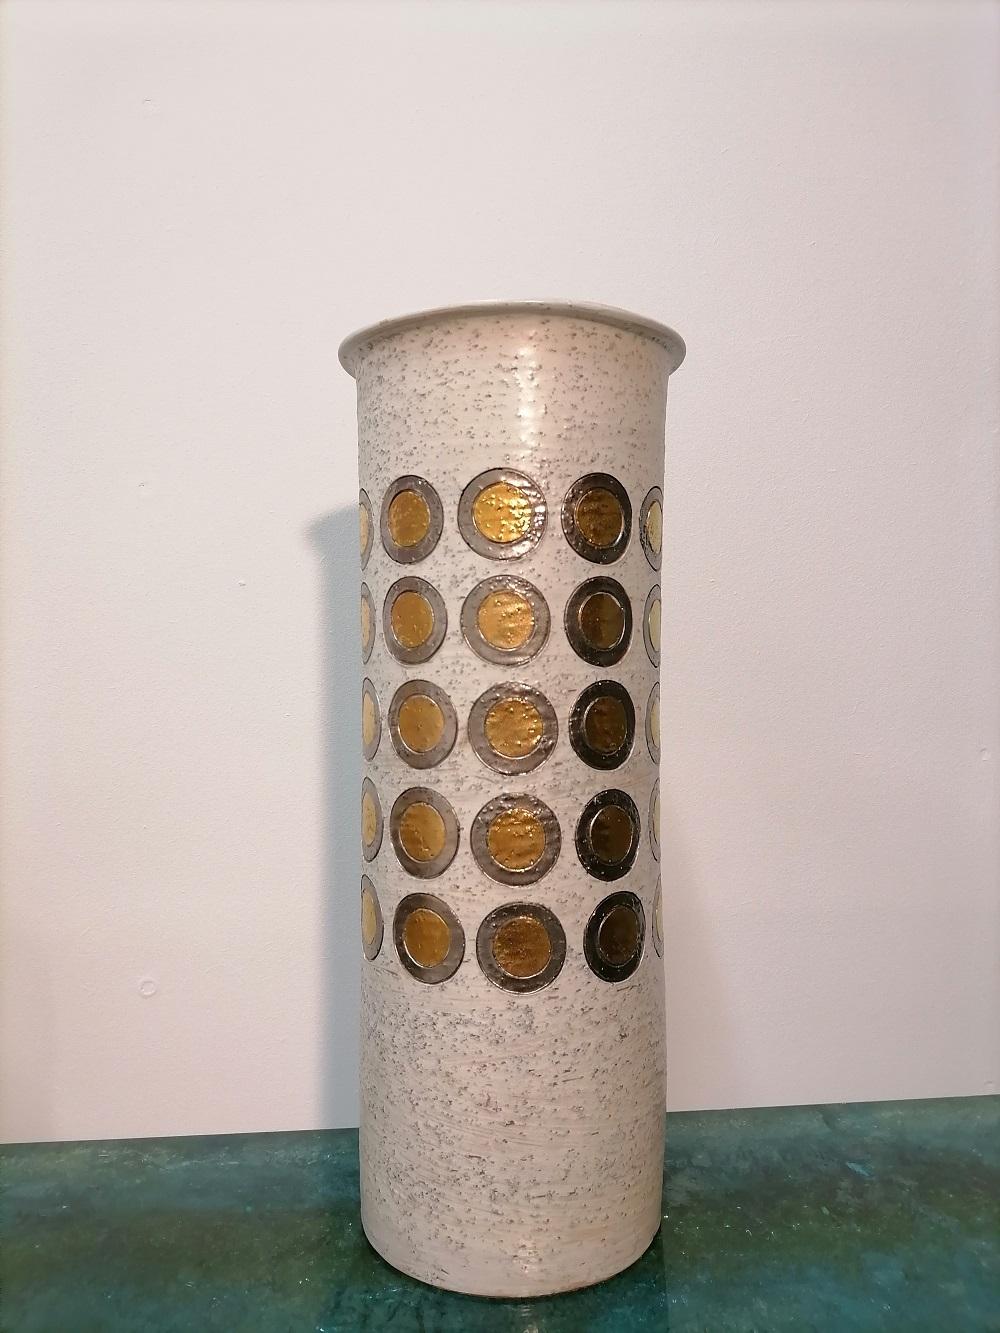 Bitossi stoneware Chamotte extra large vase, Italy, 1970.

Big Bitossi vase

Decor with rings of gold and silver

Measures: Height 40cm, diameter 16cm

Minimal foot bite.